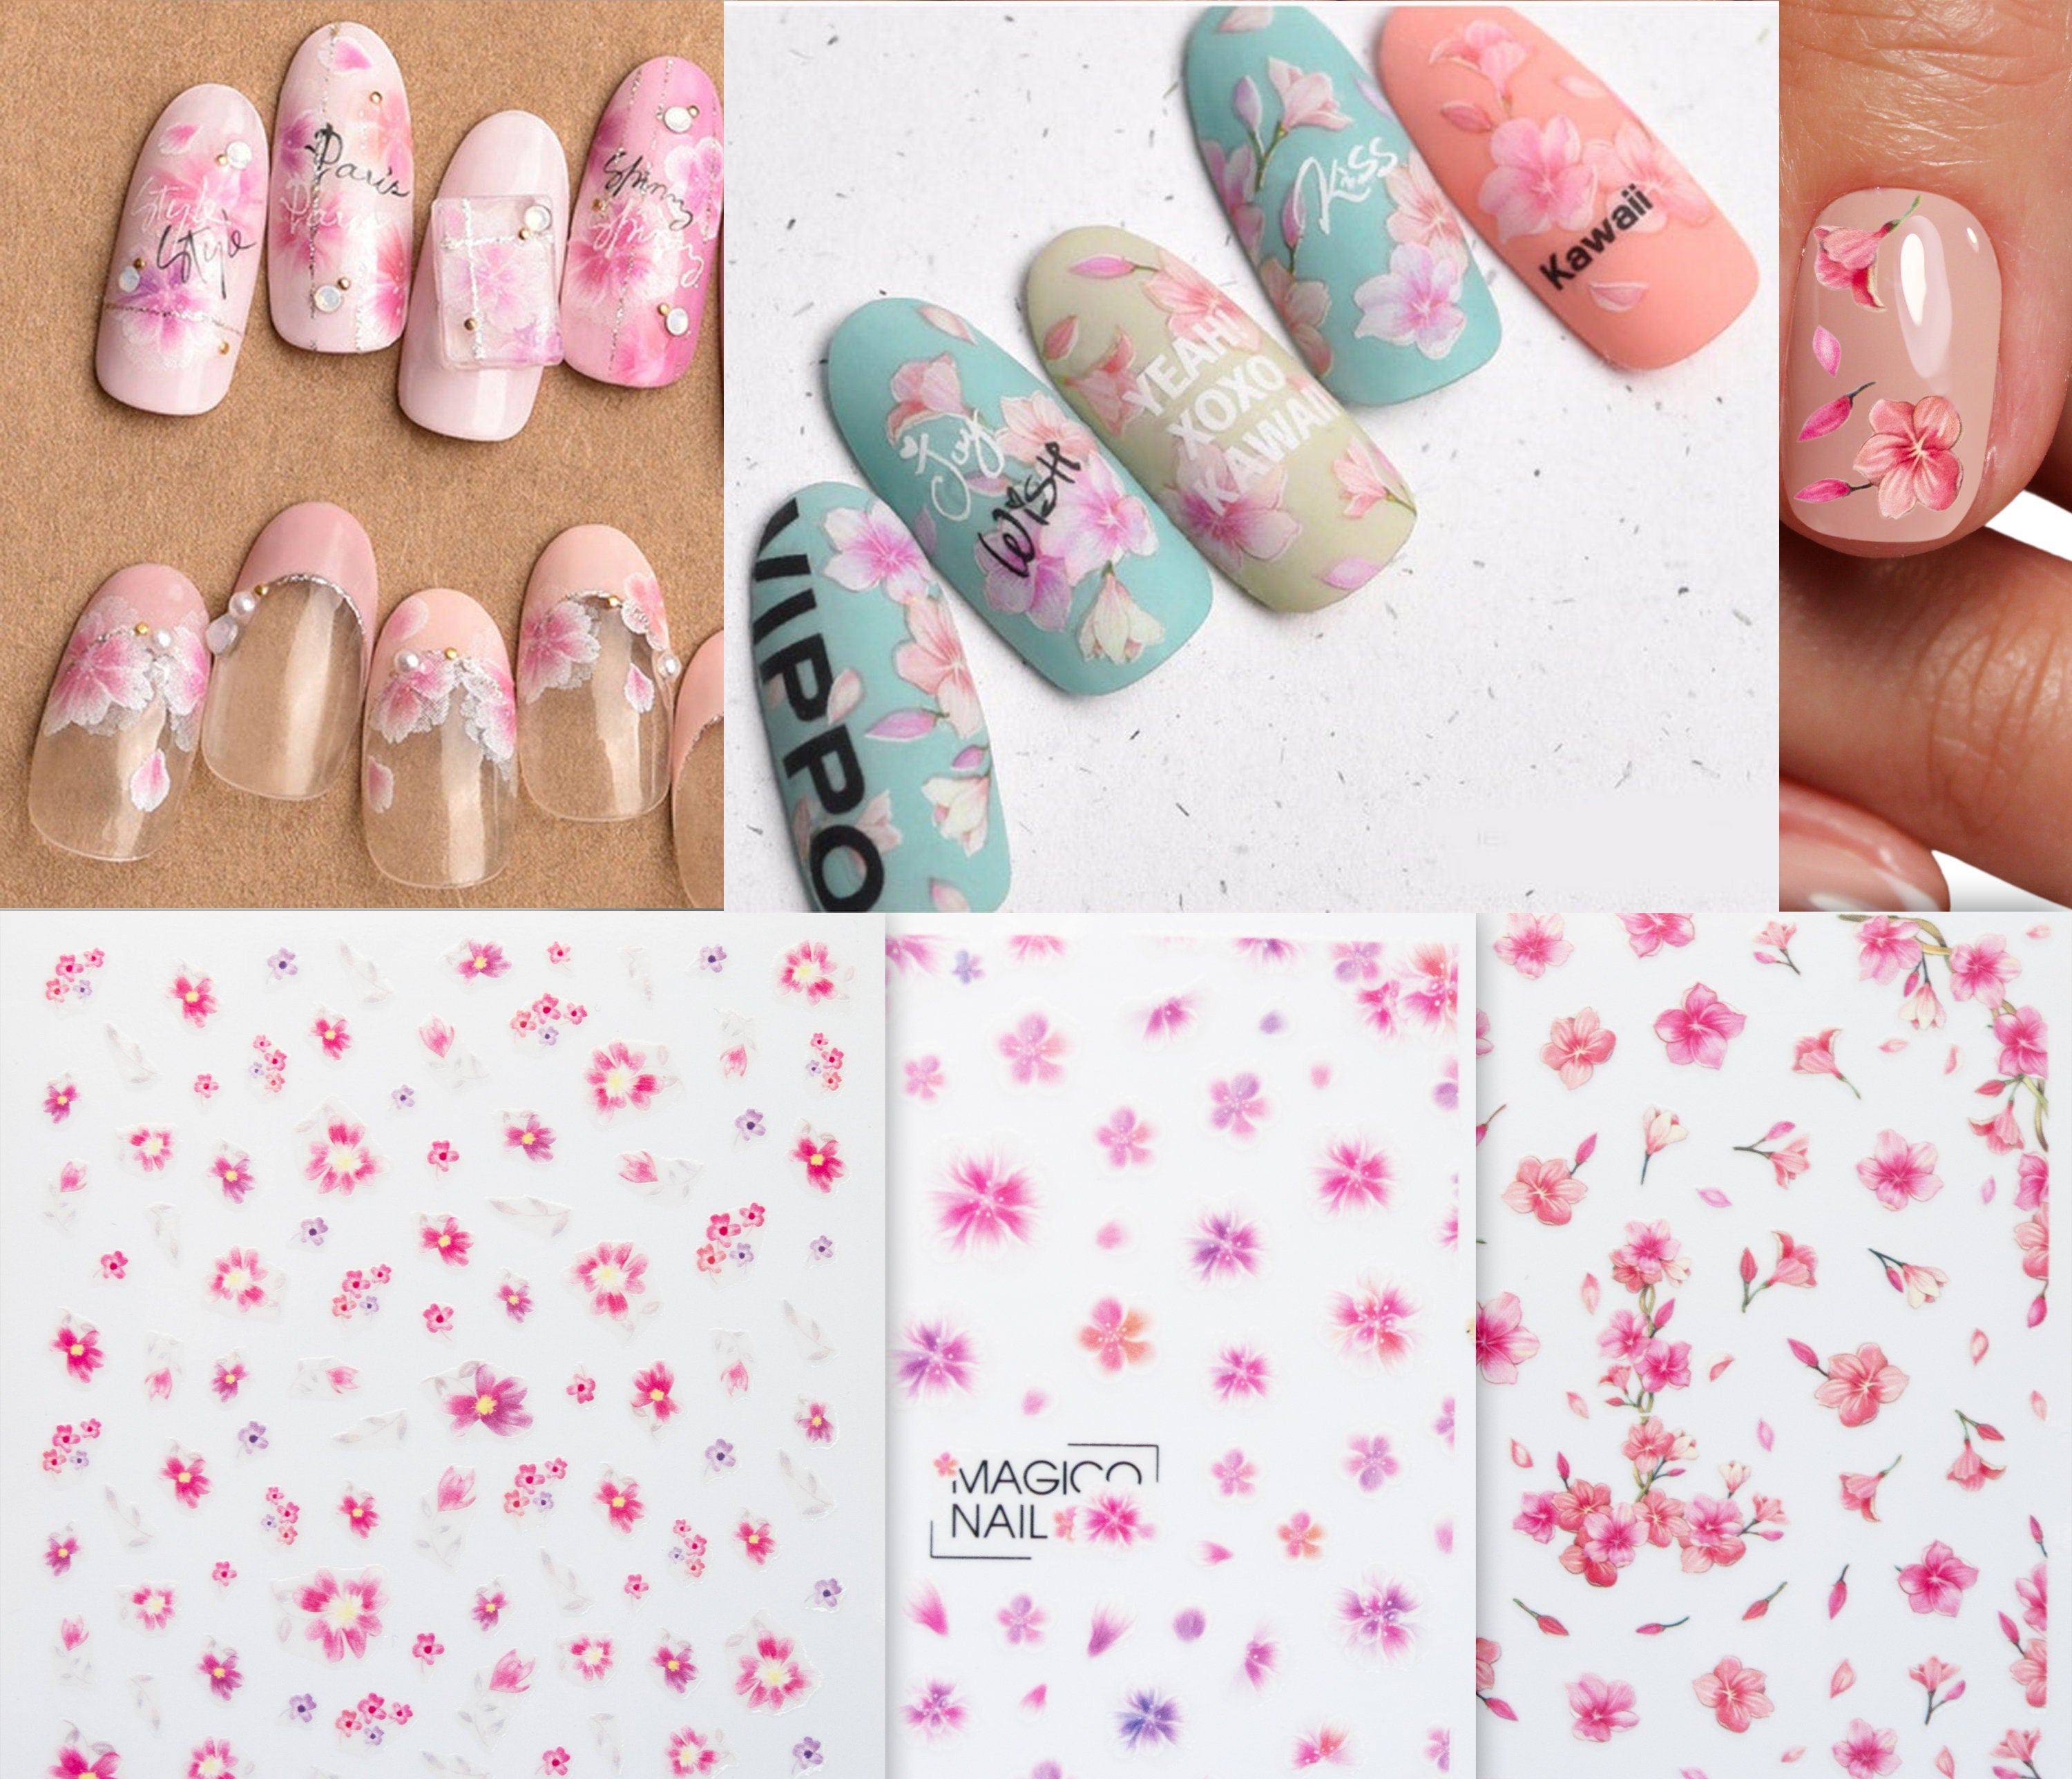 Ink Blooming 3D Nail Flowers Leaves Stickers Floral Graffiti Watercolor  Self-Adhesive Slider For DIY Nail Art Decoration LAF021 - AliExpress, Nail  Flowers - valleyresorts.co.uk